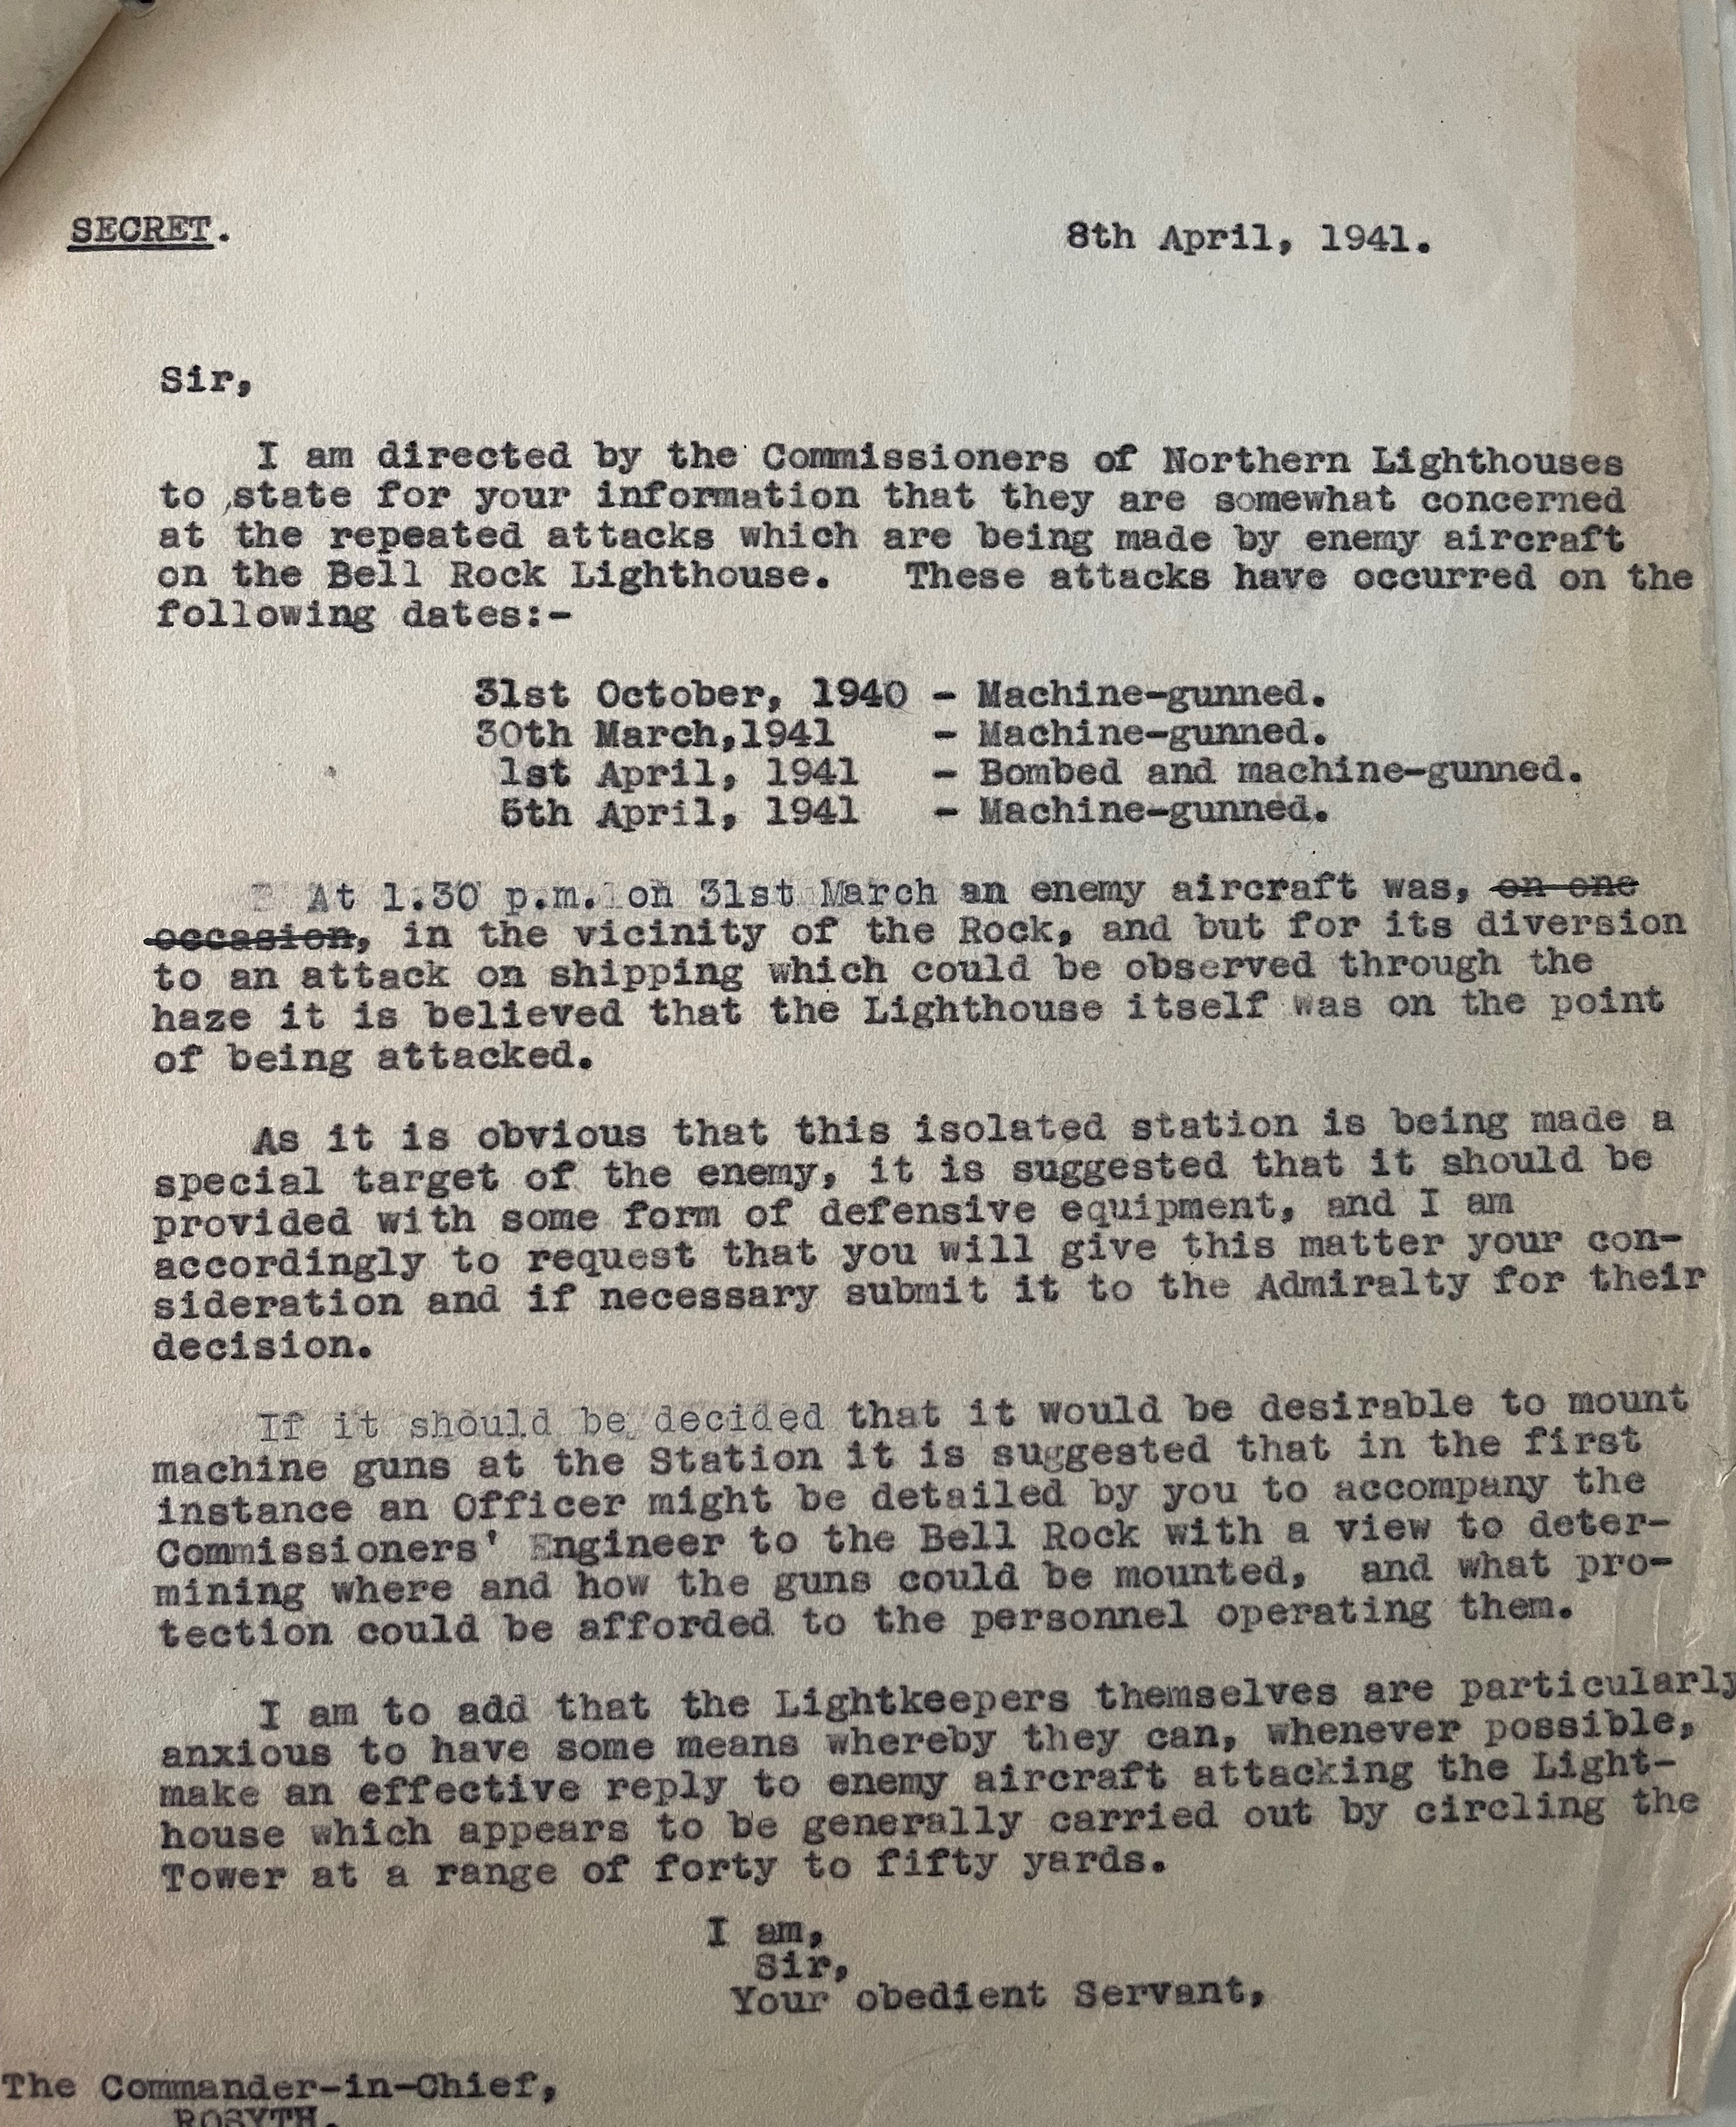 Letter from the Commander in Chief, 8 April 1941 detailing the attacks on the Bell Rock Lighthouse